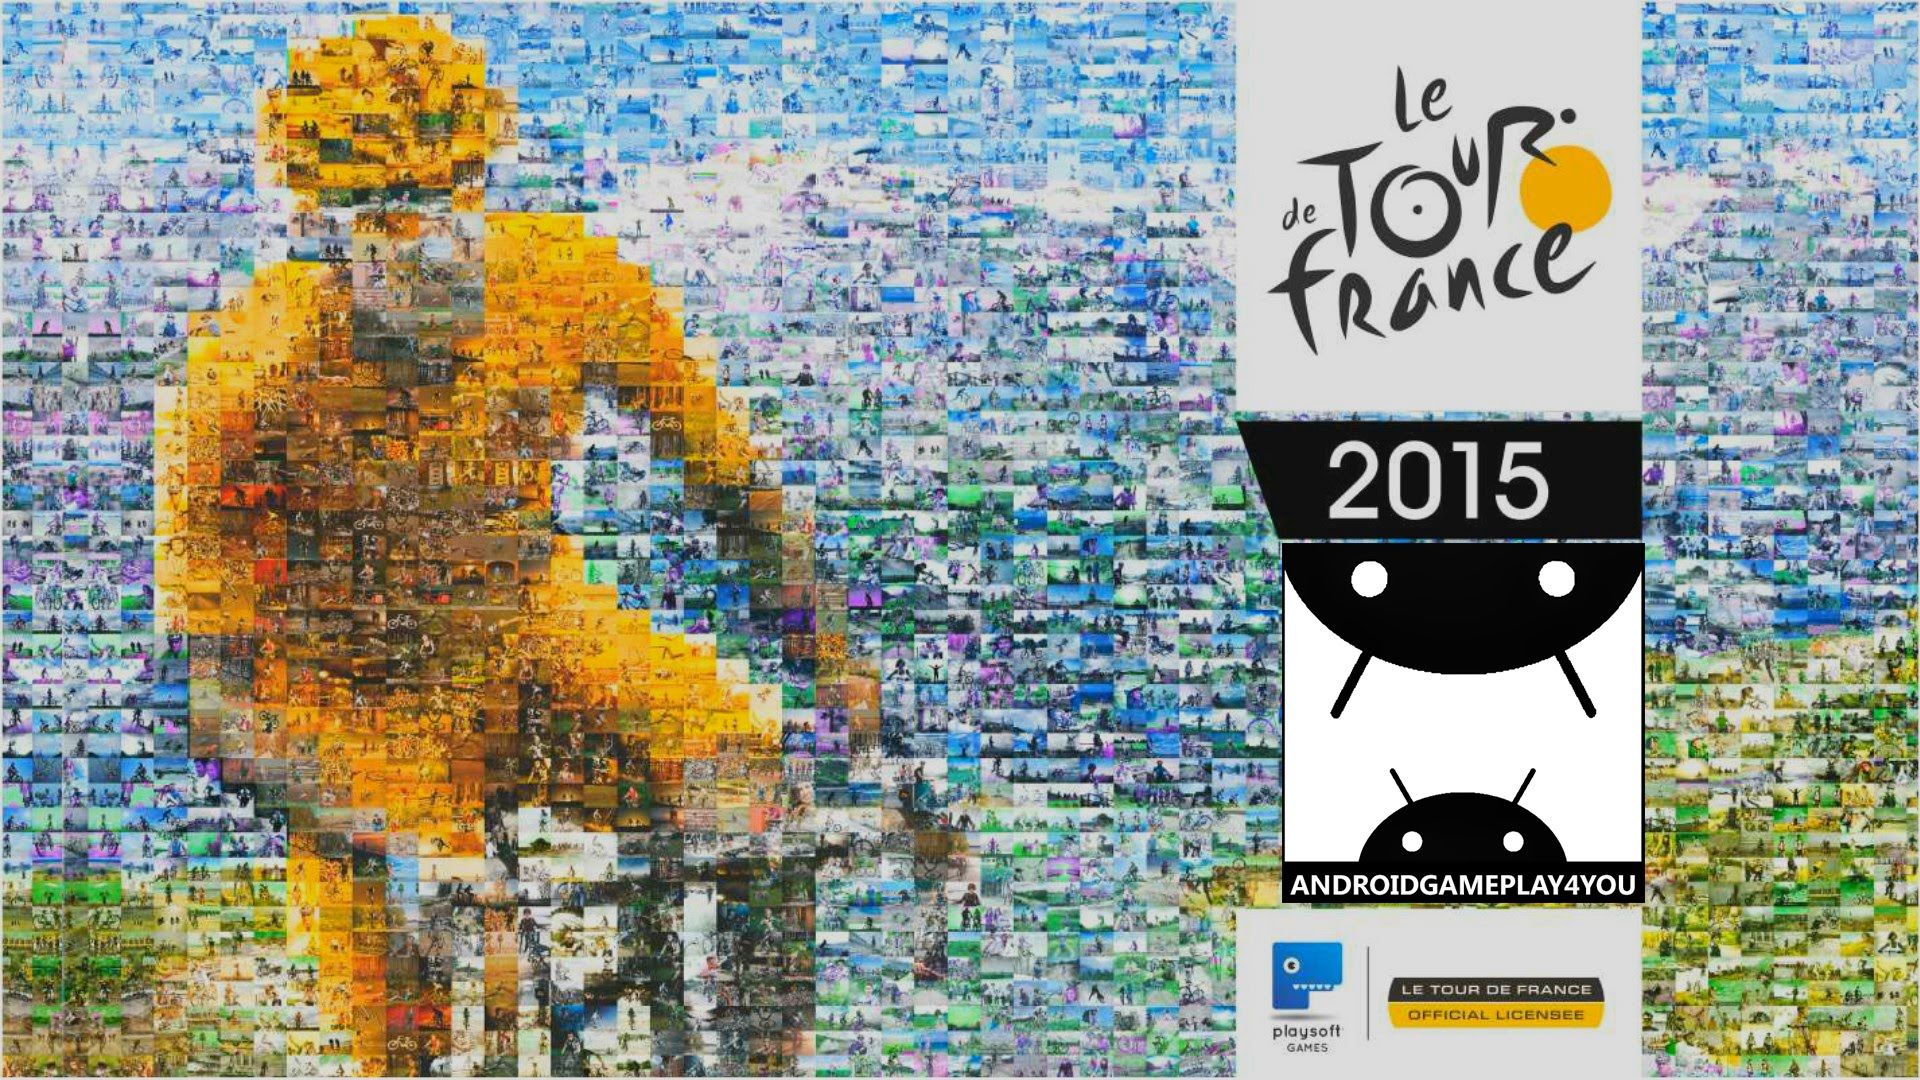 Tour de France 2015 - The Game Android GamePlay Trailer (1080p ...